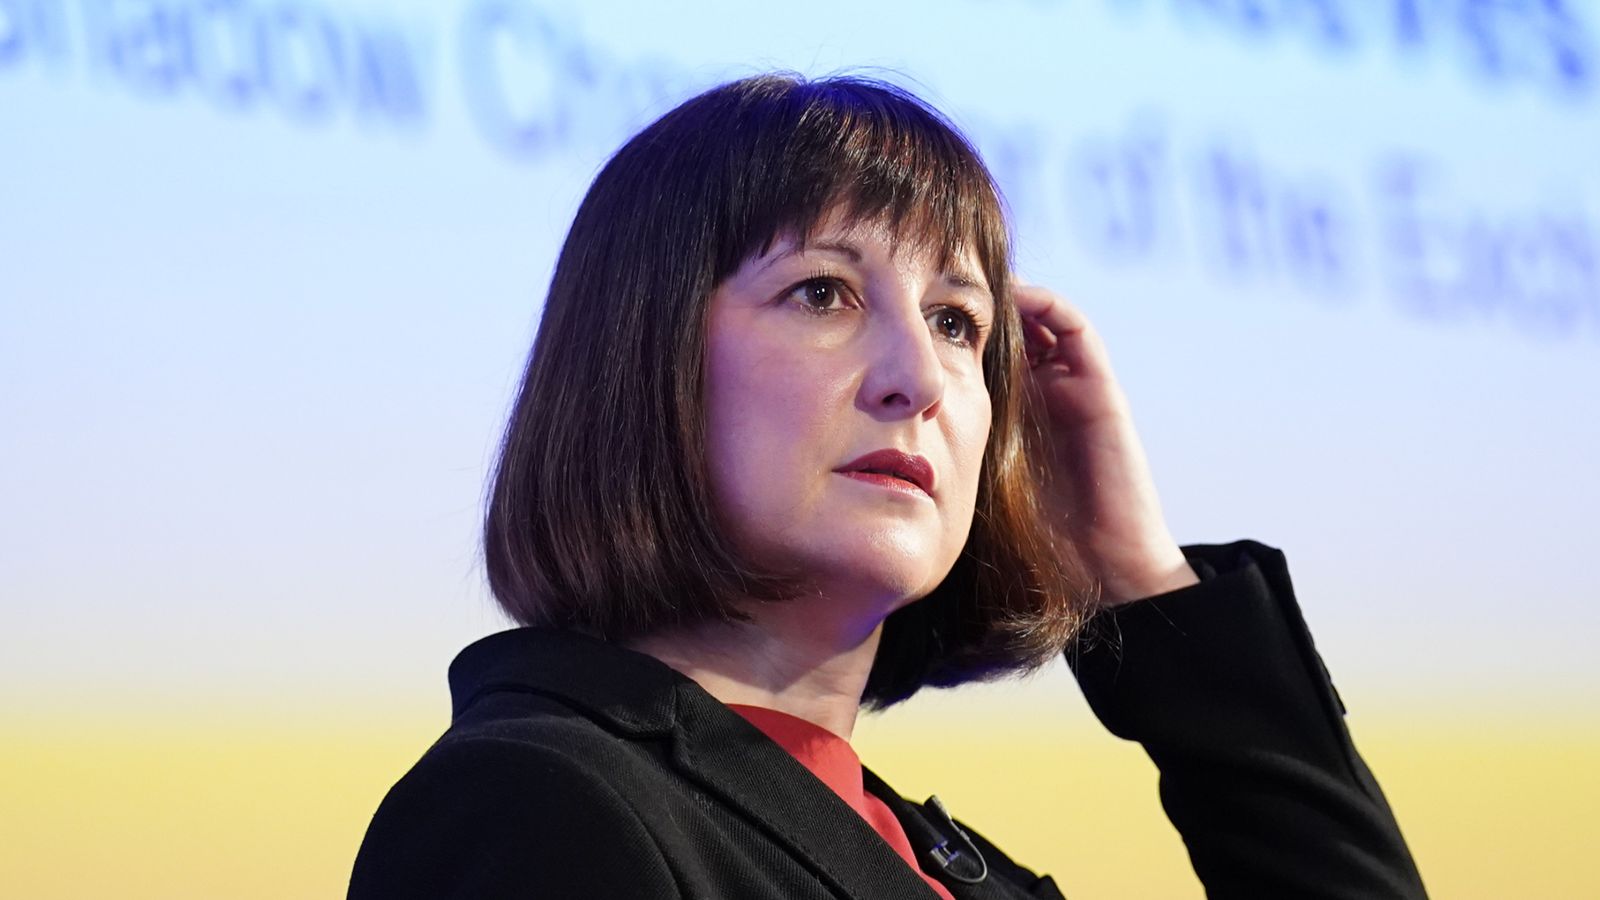 Voters prefer Rachel Reeves to Jeremy Hunt for chancellor, poll shows